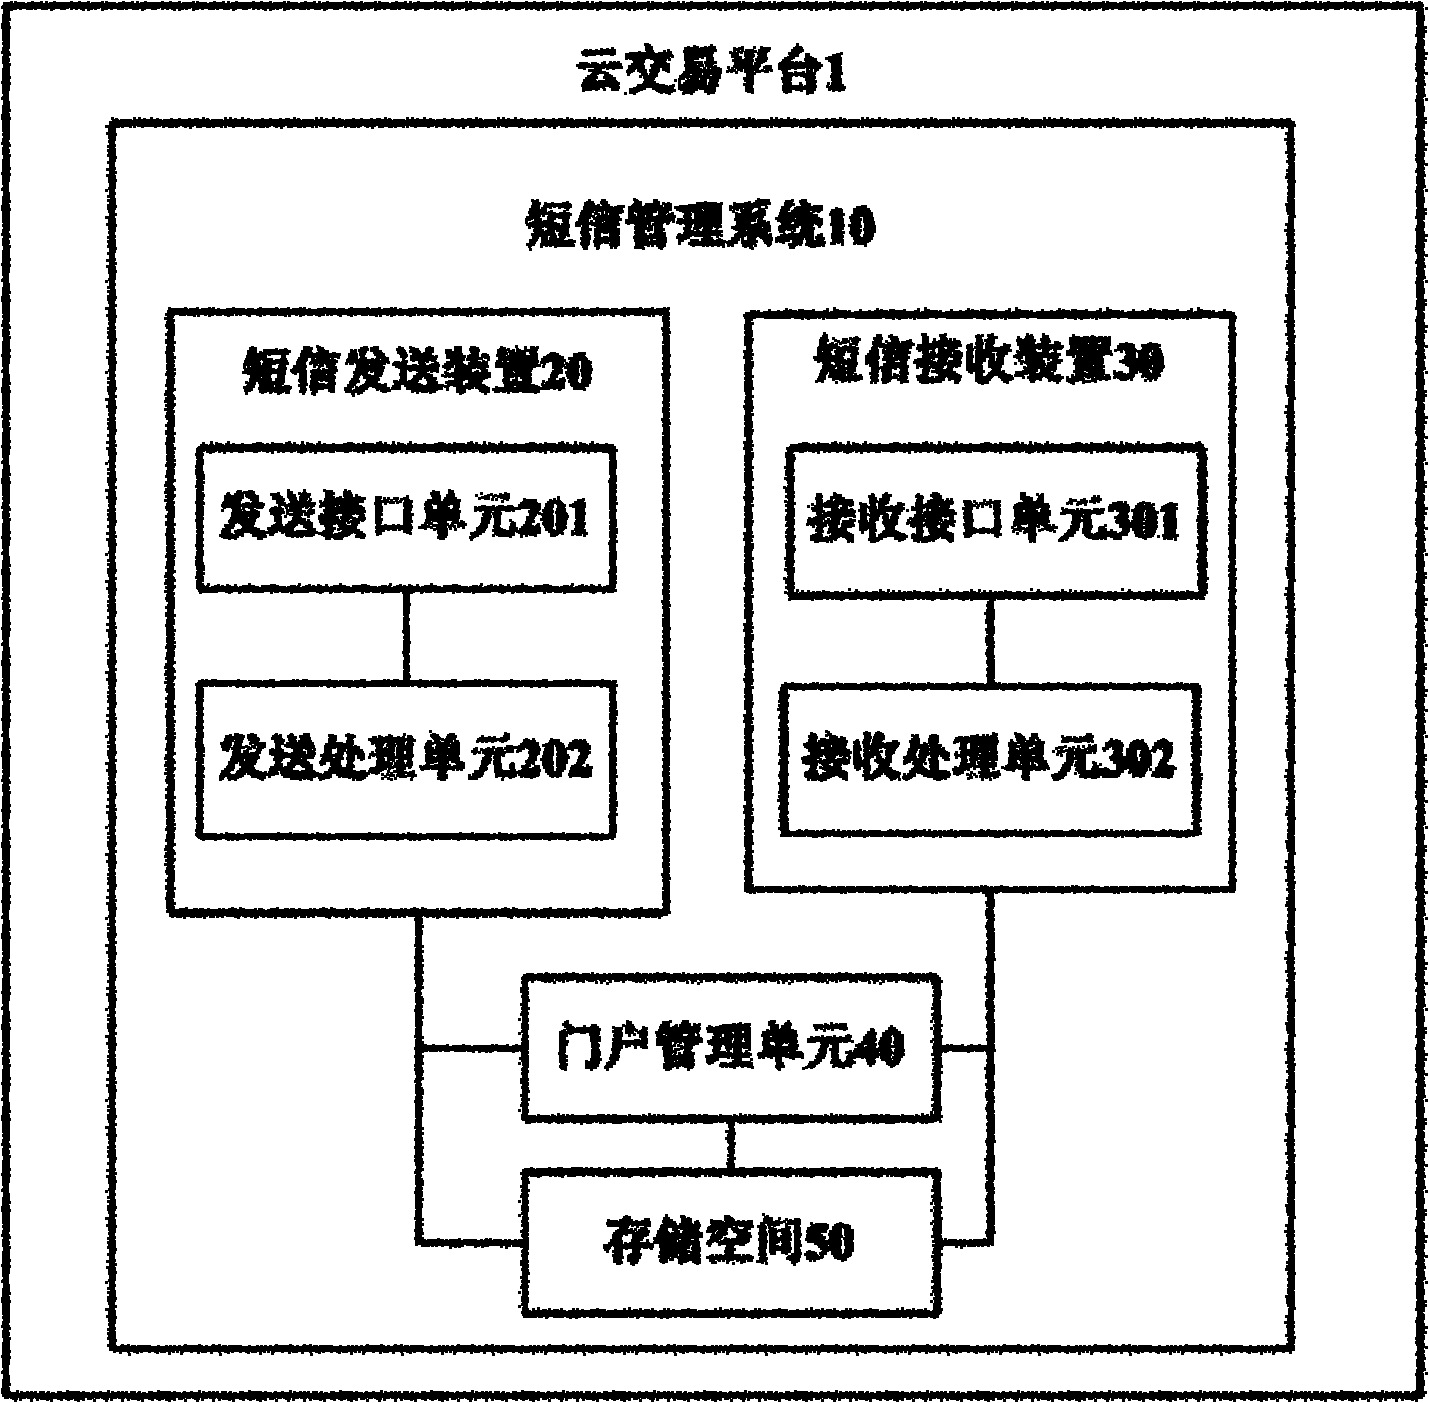 Short message receiving device matched with short message management system